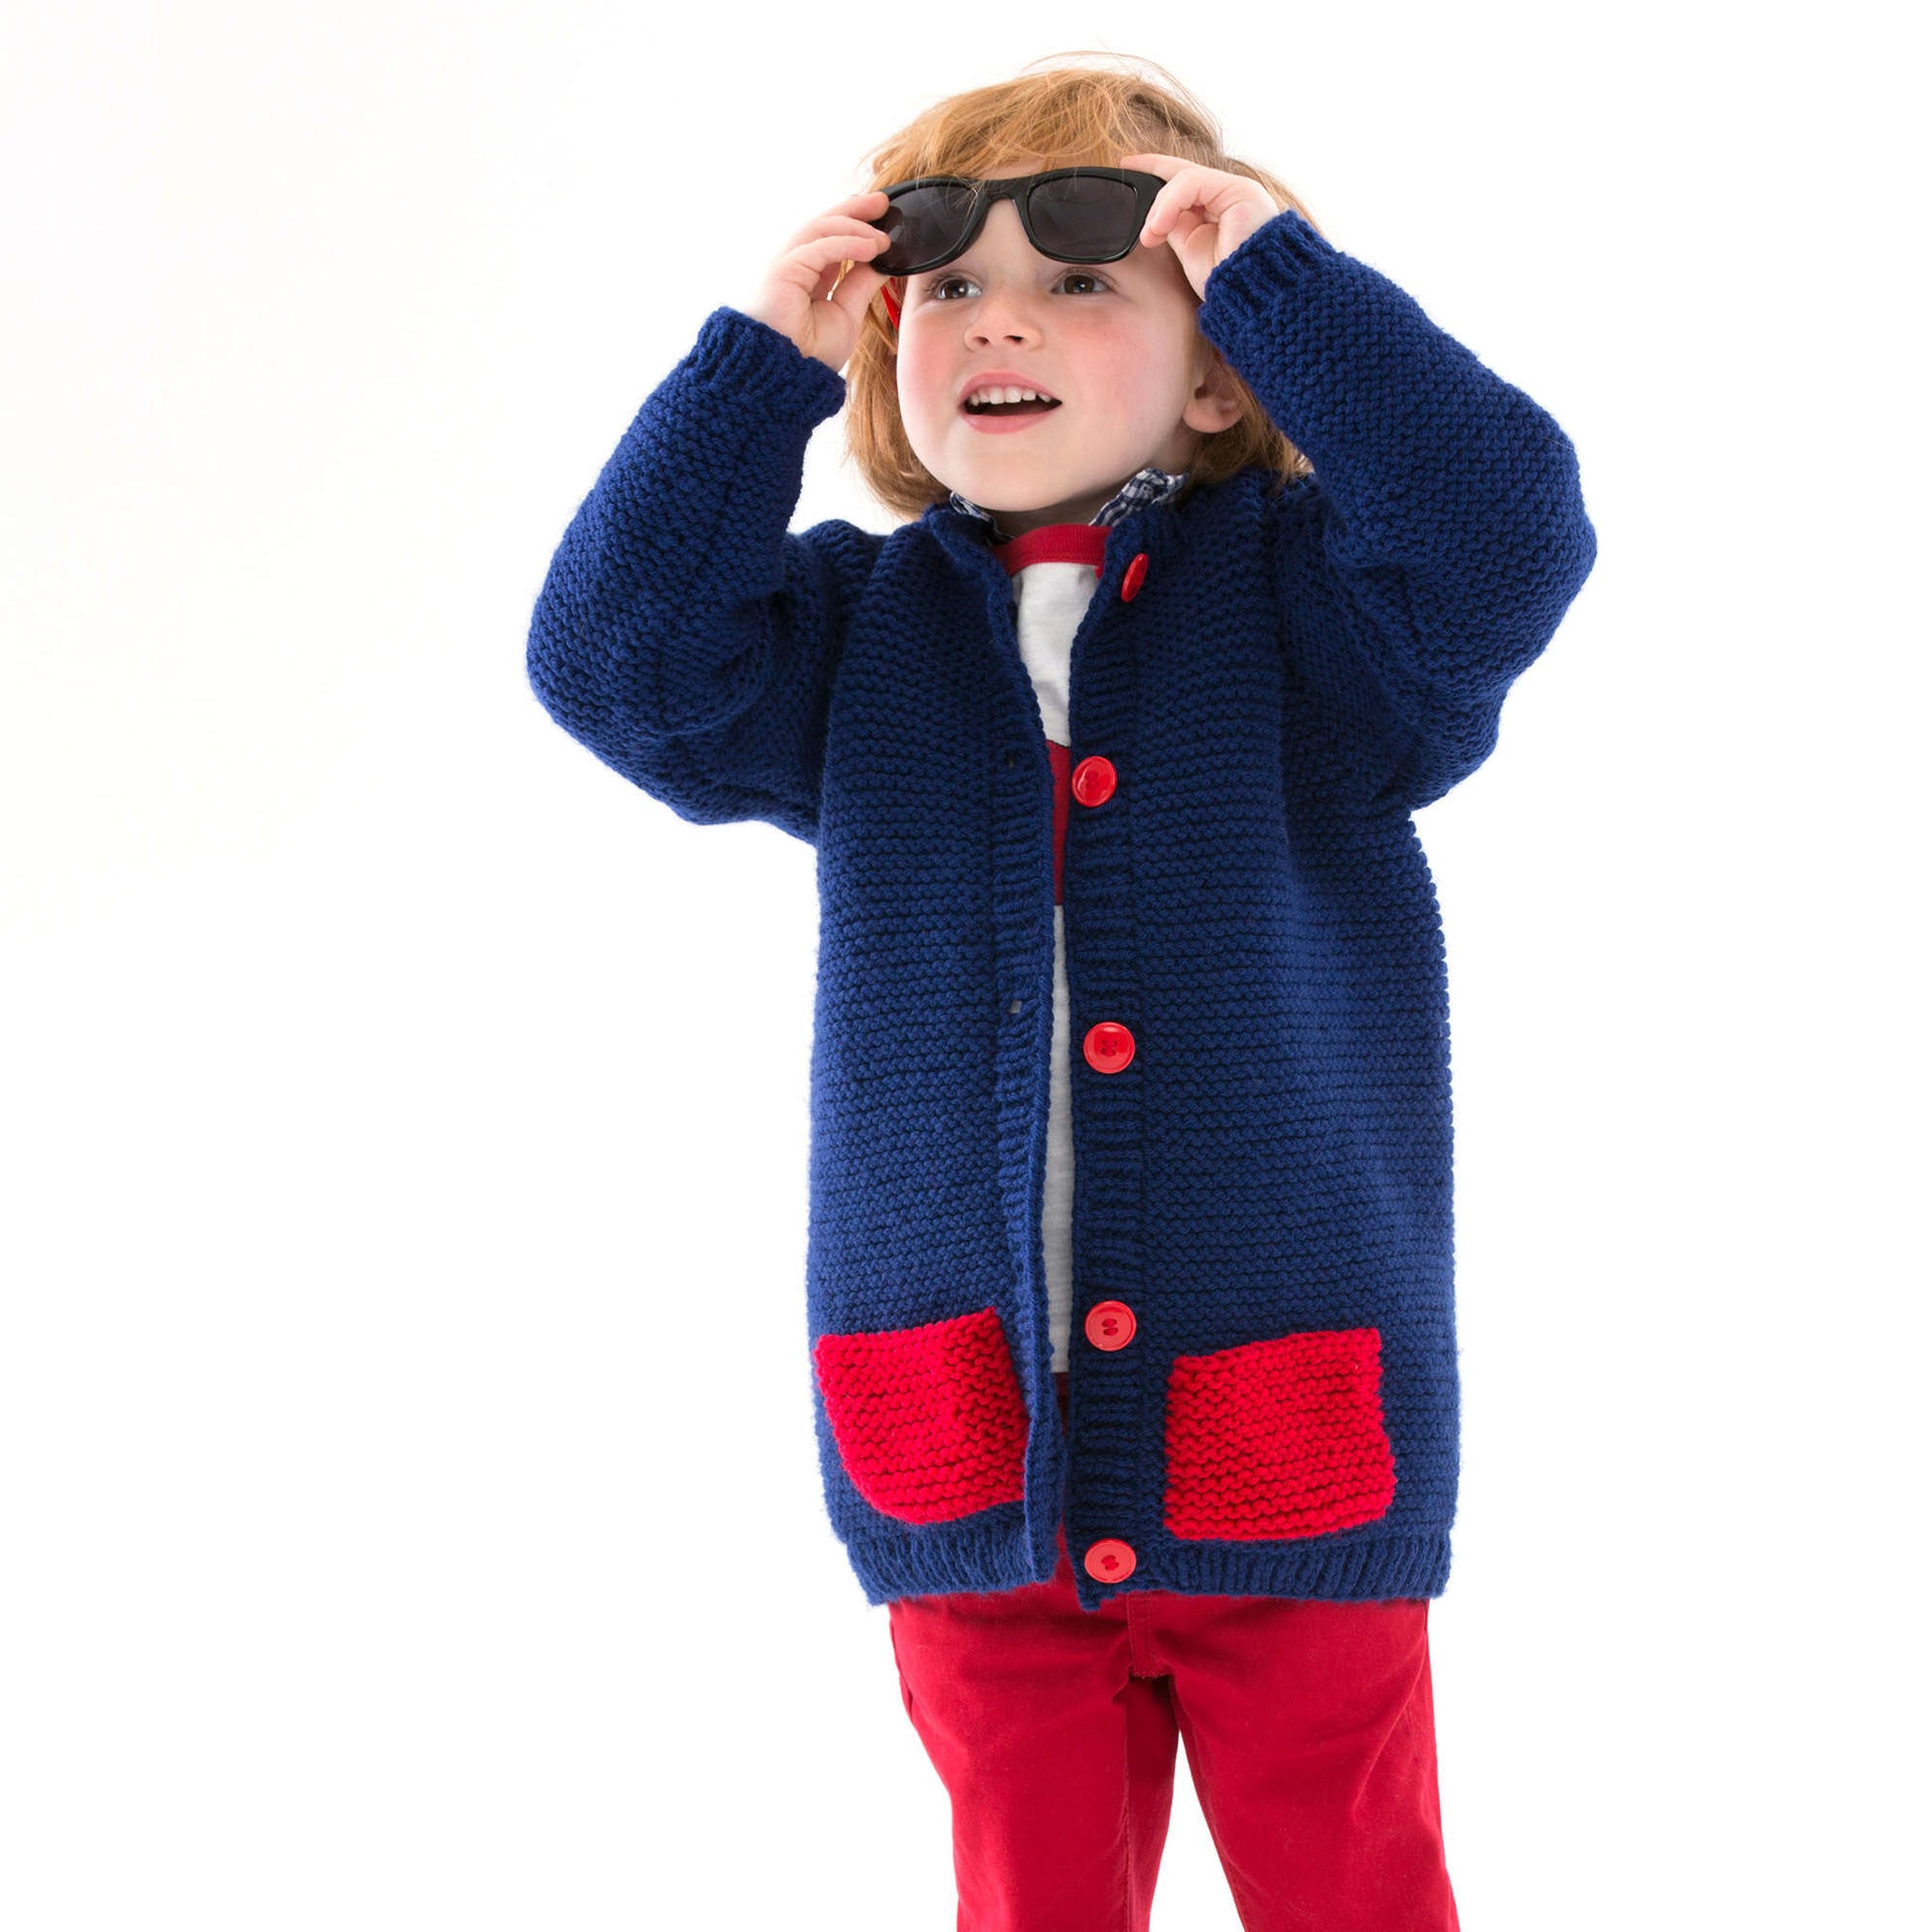 Free Red Heart Too Cool Boy's Knit Cardigan Pattern